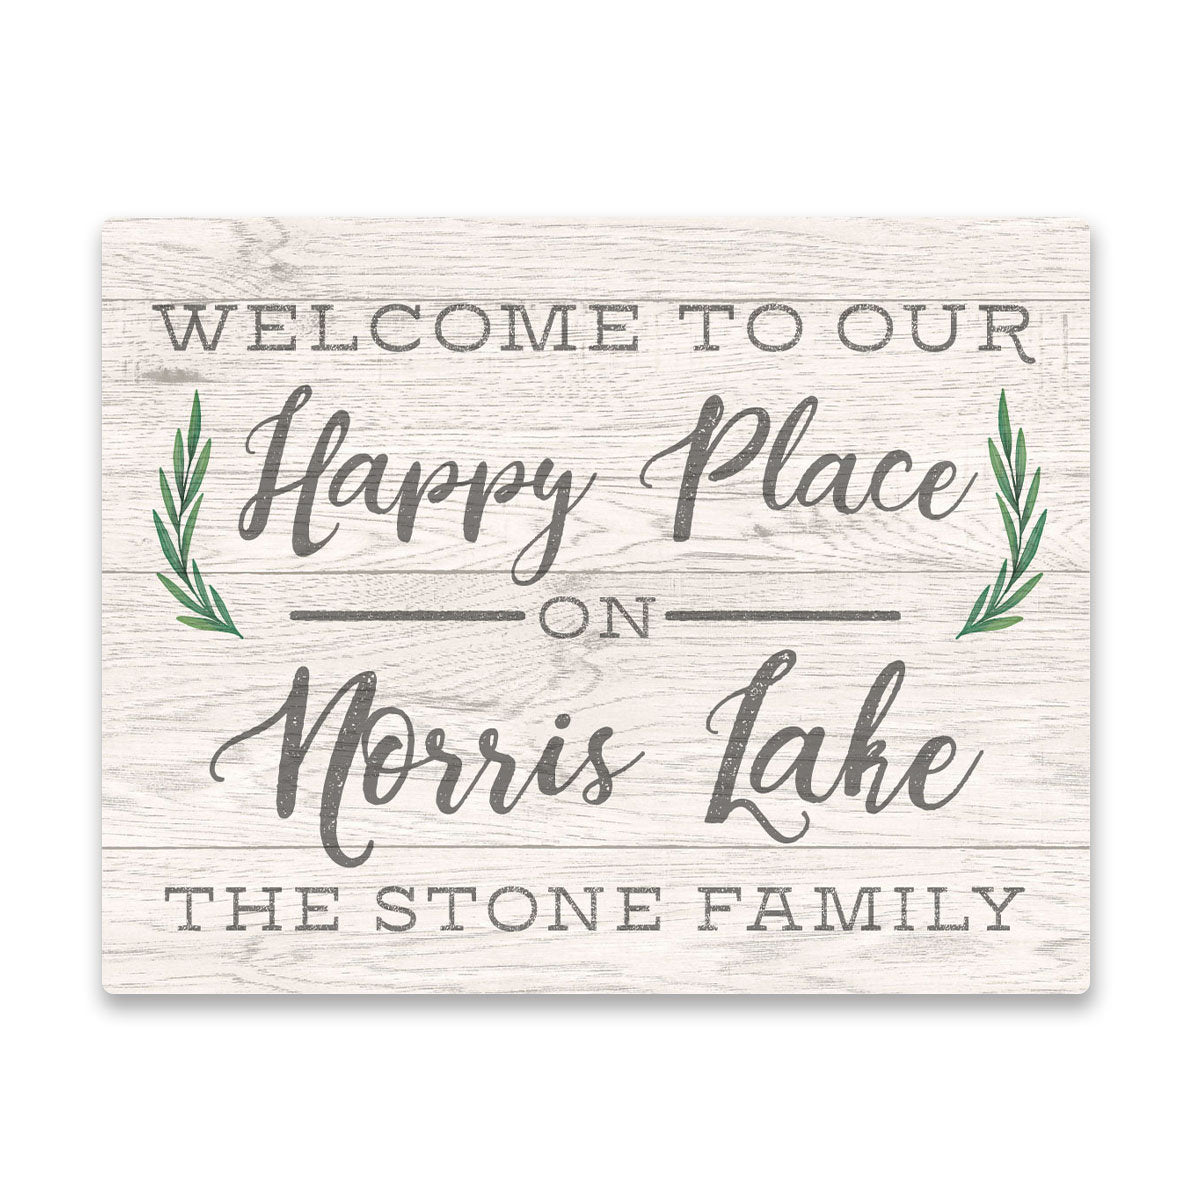 Personalized Welcome to Our Happy Place on Norris Lake Wall Art